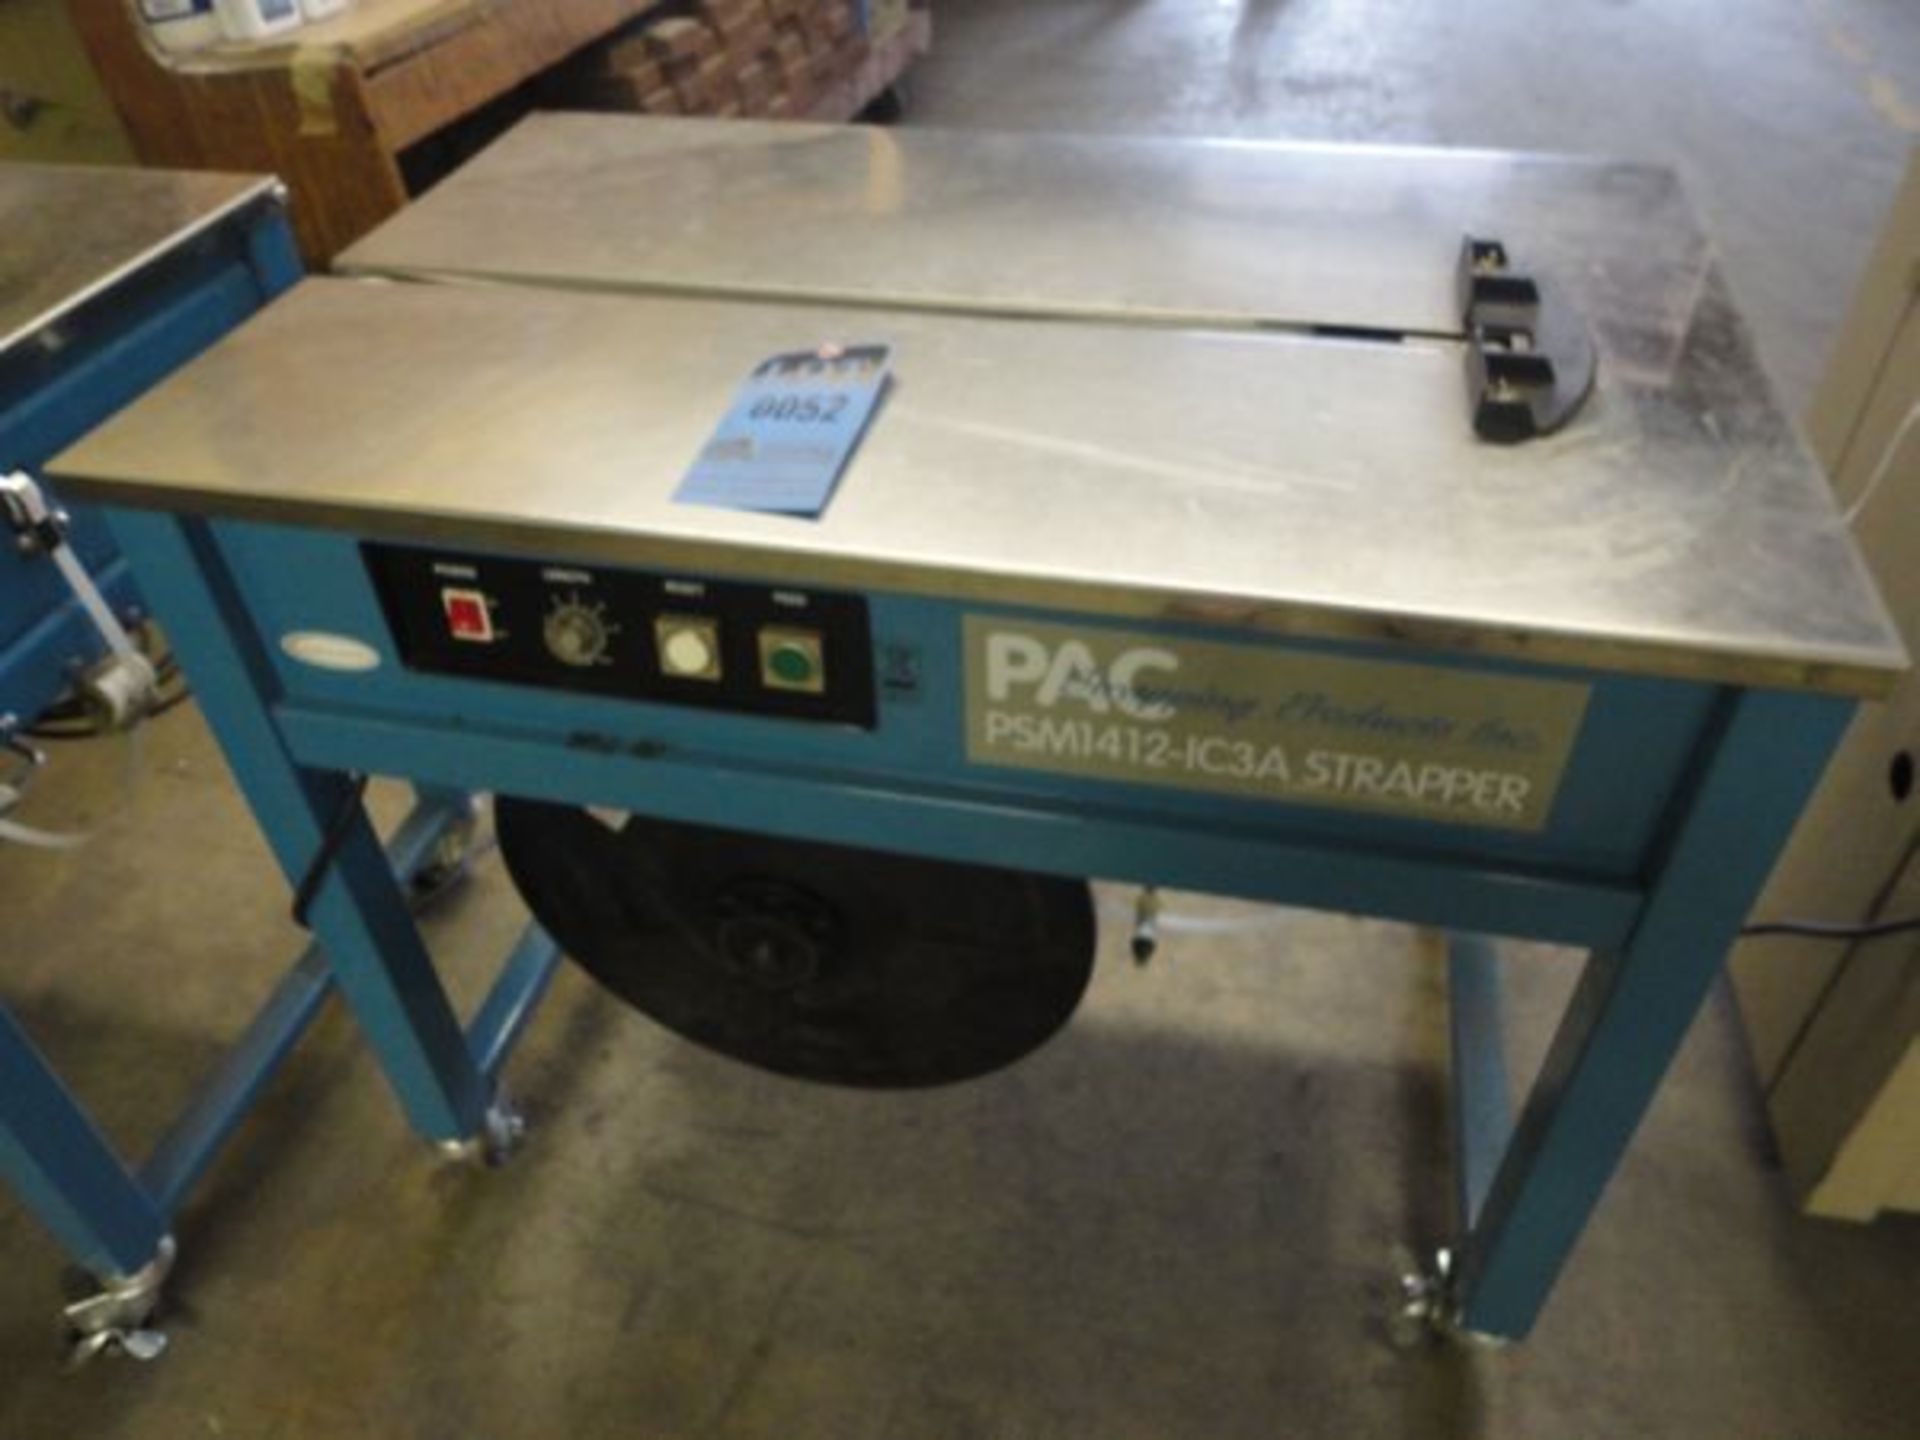 PAC SHIPPING PRODUCTS MODEL PSM1412-1C3A PORTABLE PLASTIC STRAPPER; S/N 907138160